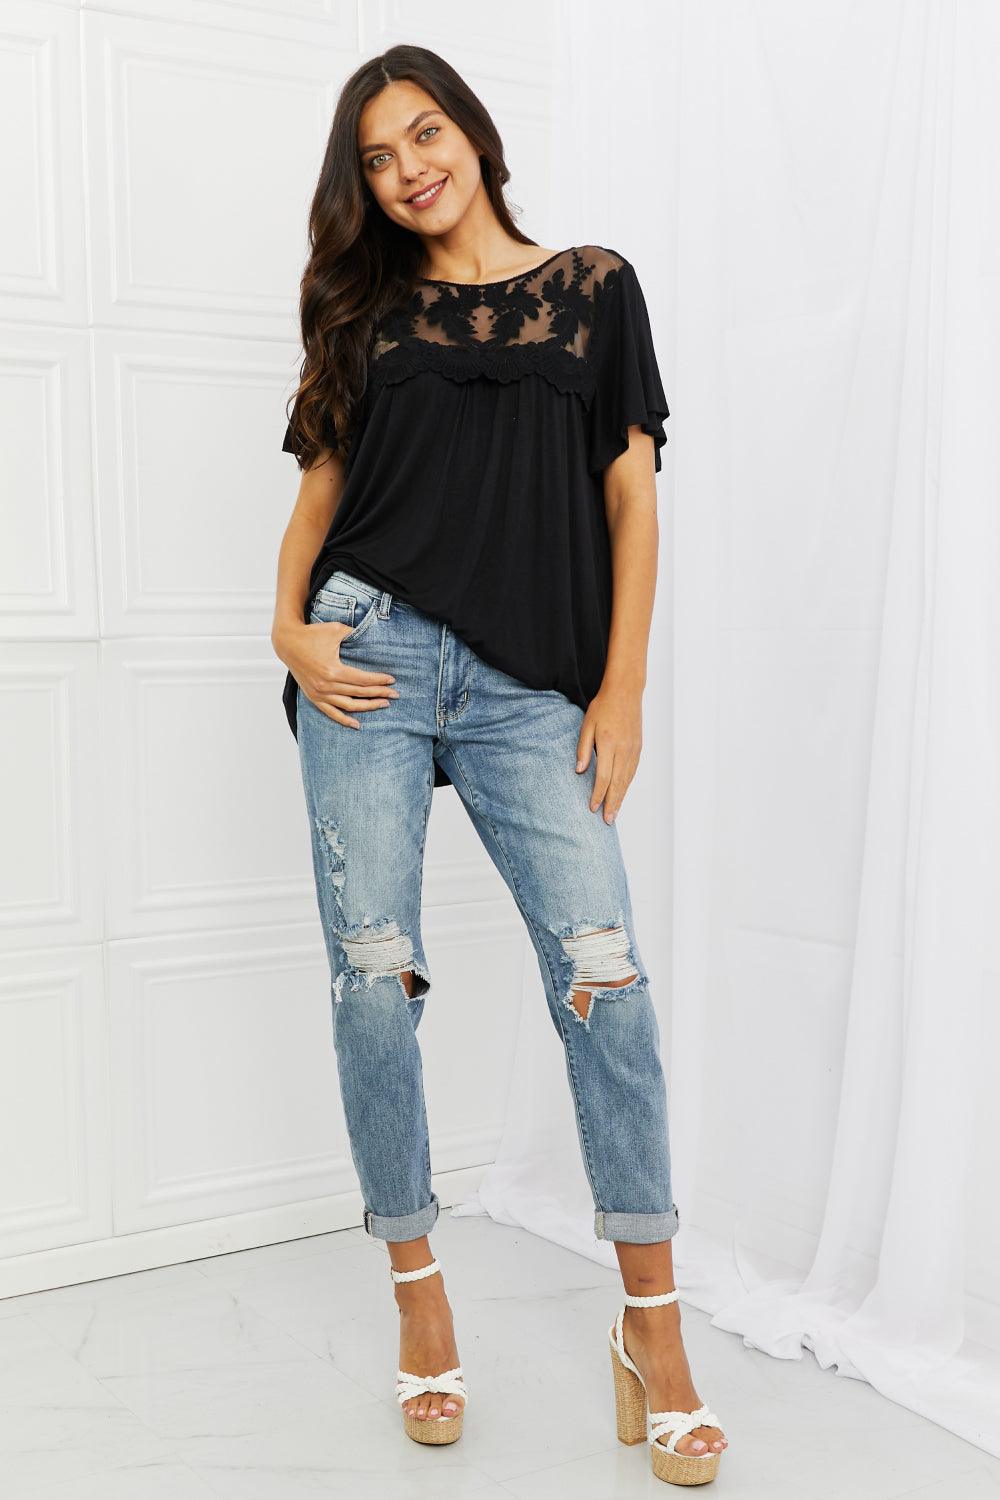 Culture Code Ready To Go Full Size Lace Embroidered Top in Black - Glamorous Boutique USA L.L.C.